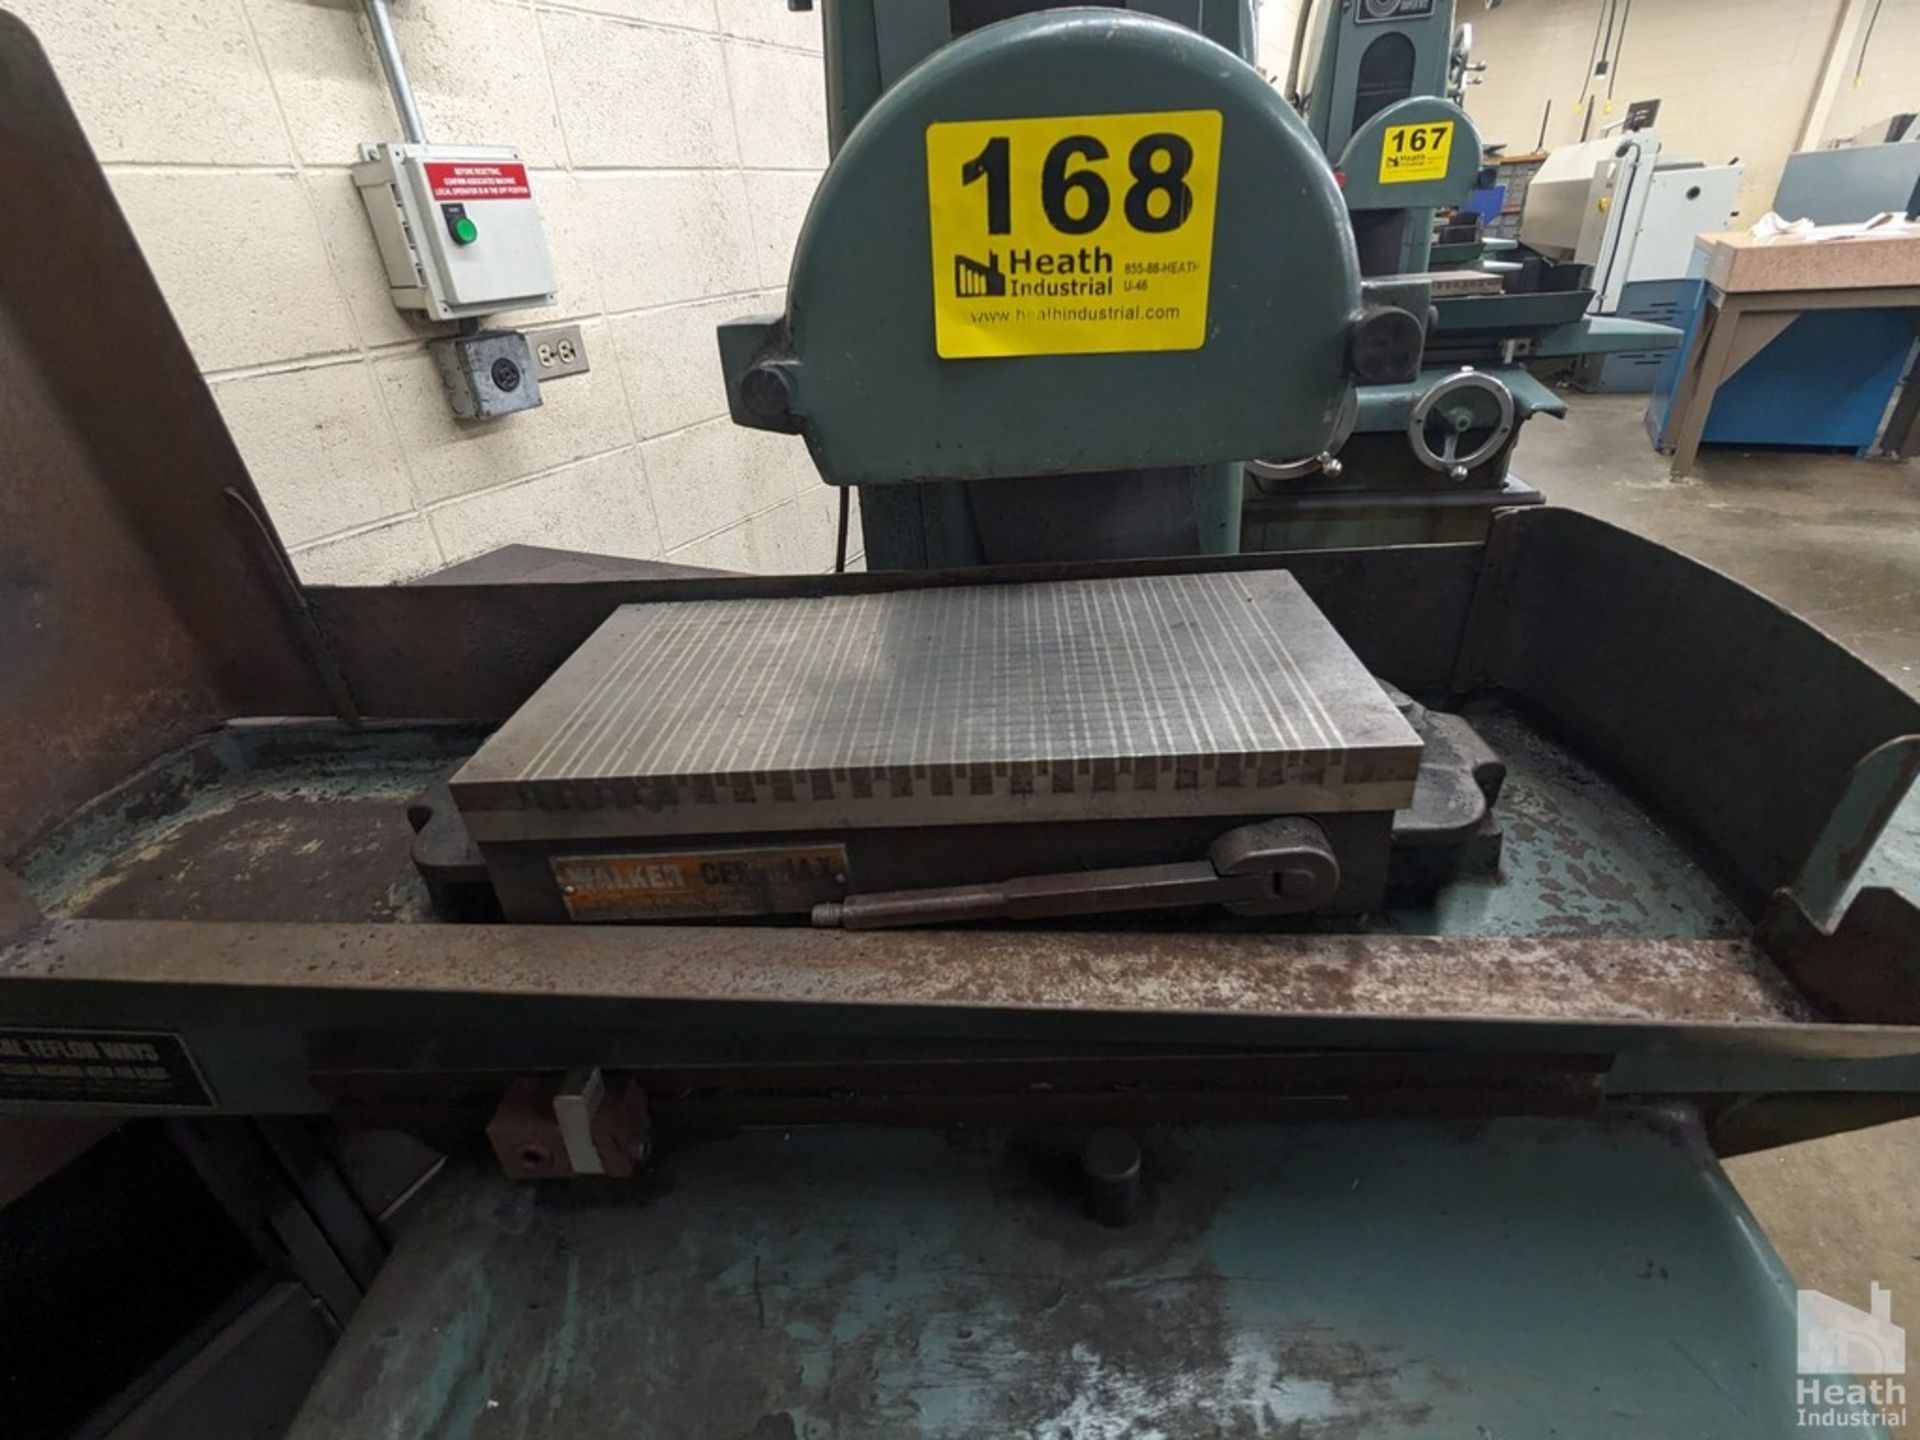 HARIG 6"X12" MODEL SUPER 612 SURFACE GRINDER, S/N 10642, WITH PERMANENT MAGNETIC CHUCK Loading - Image 4 of 5